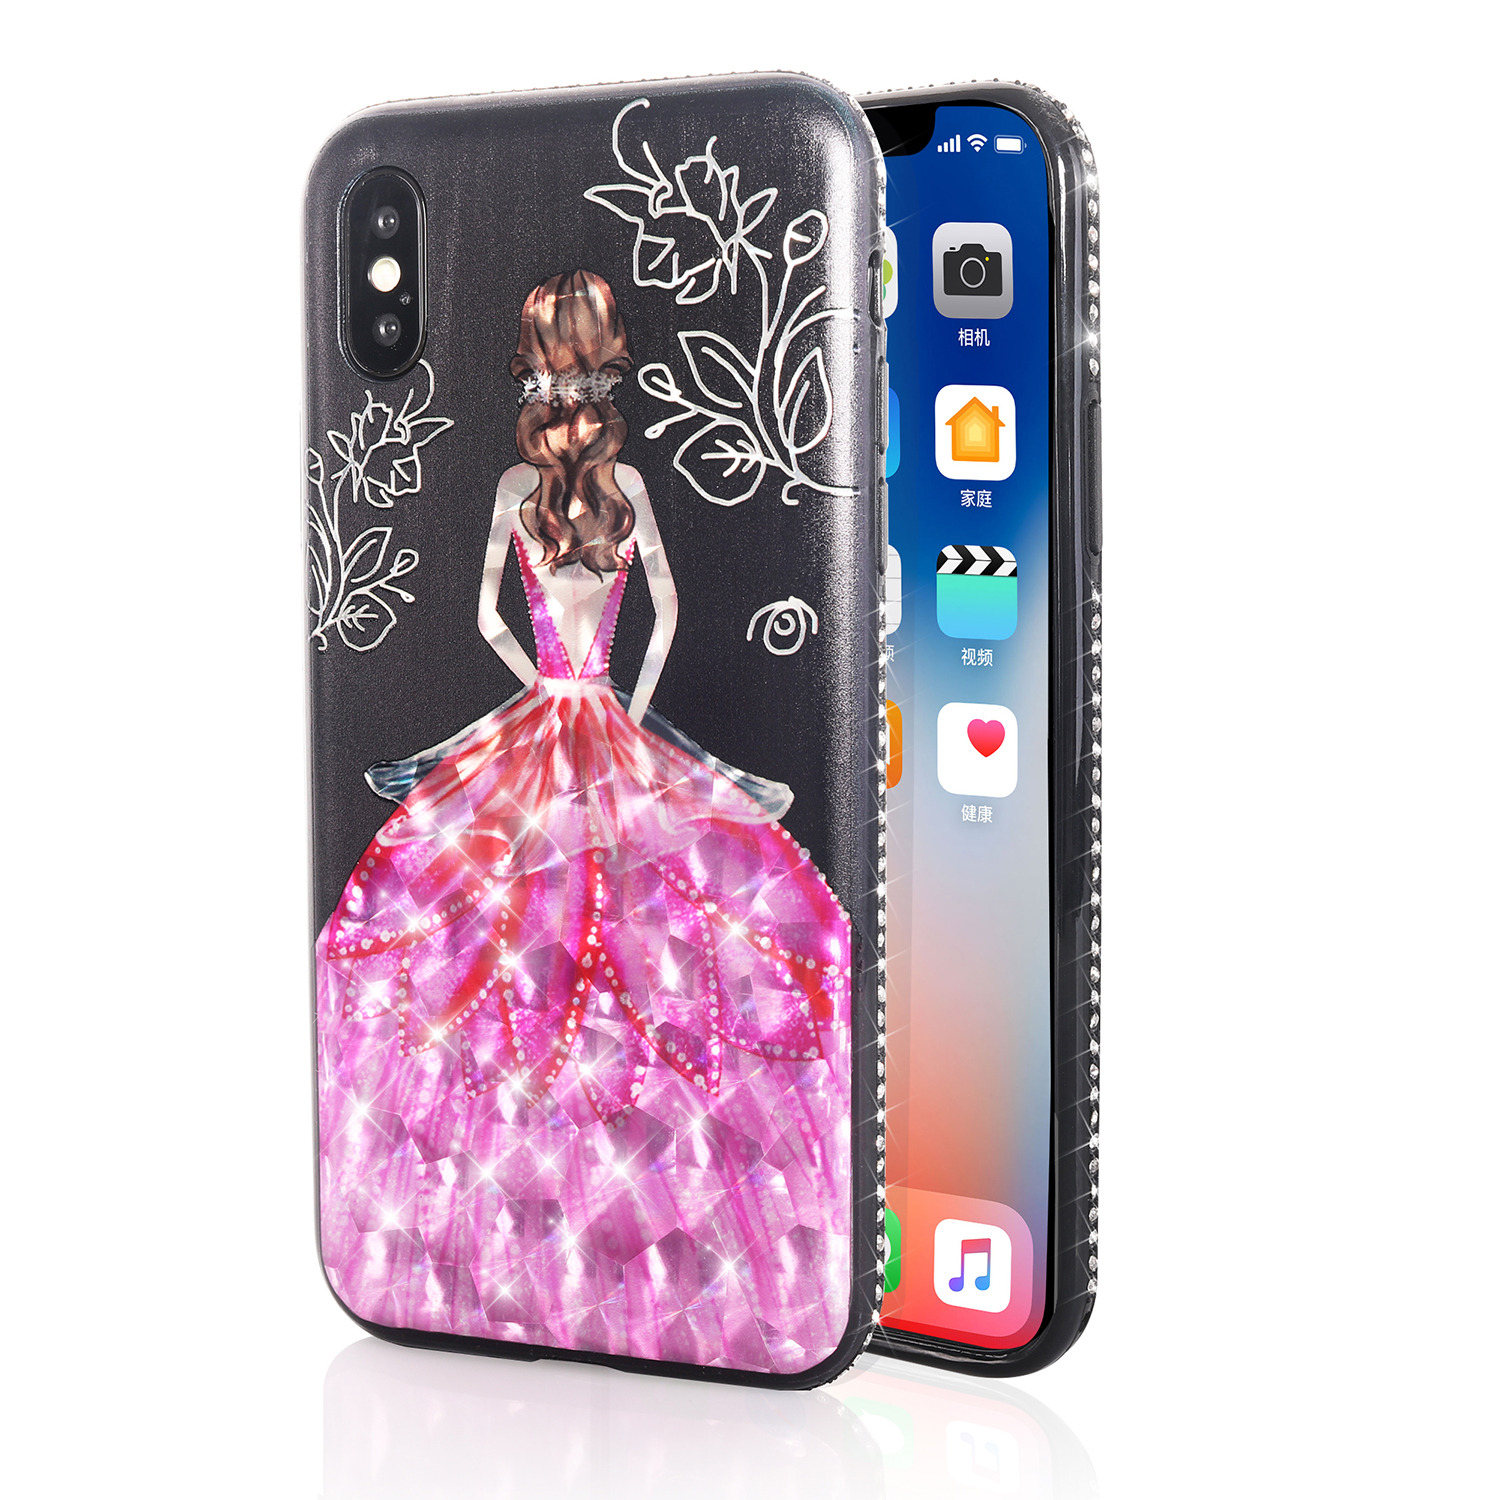 

Bakeey 3D Painting Protective Case For iPhone X/8/8 Plus/7/7 Plus/6s Plus/6 Plus/6s/6 Pink Dress Glitter Bling